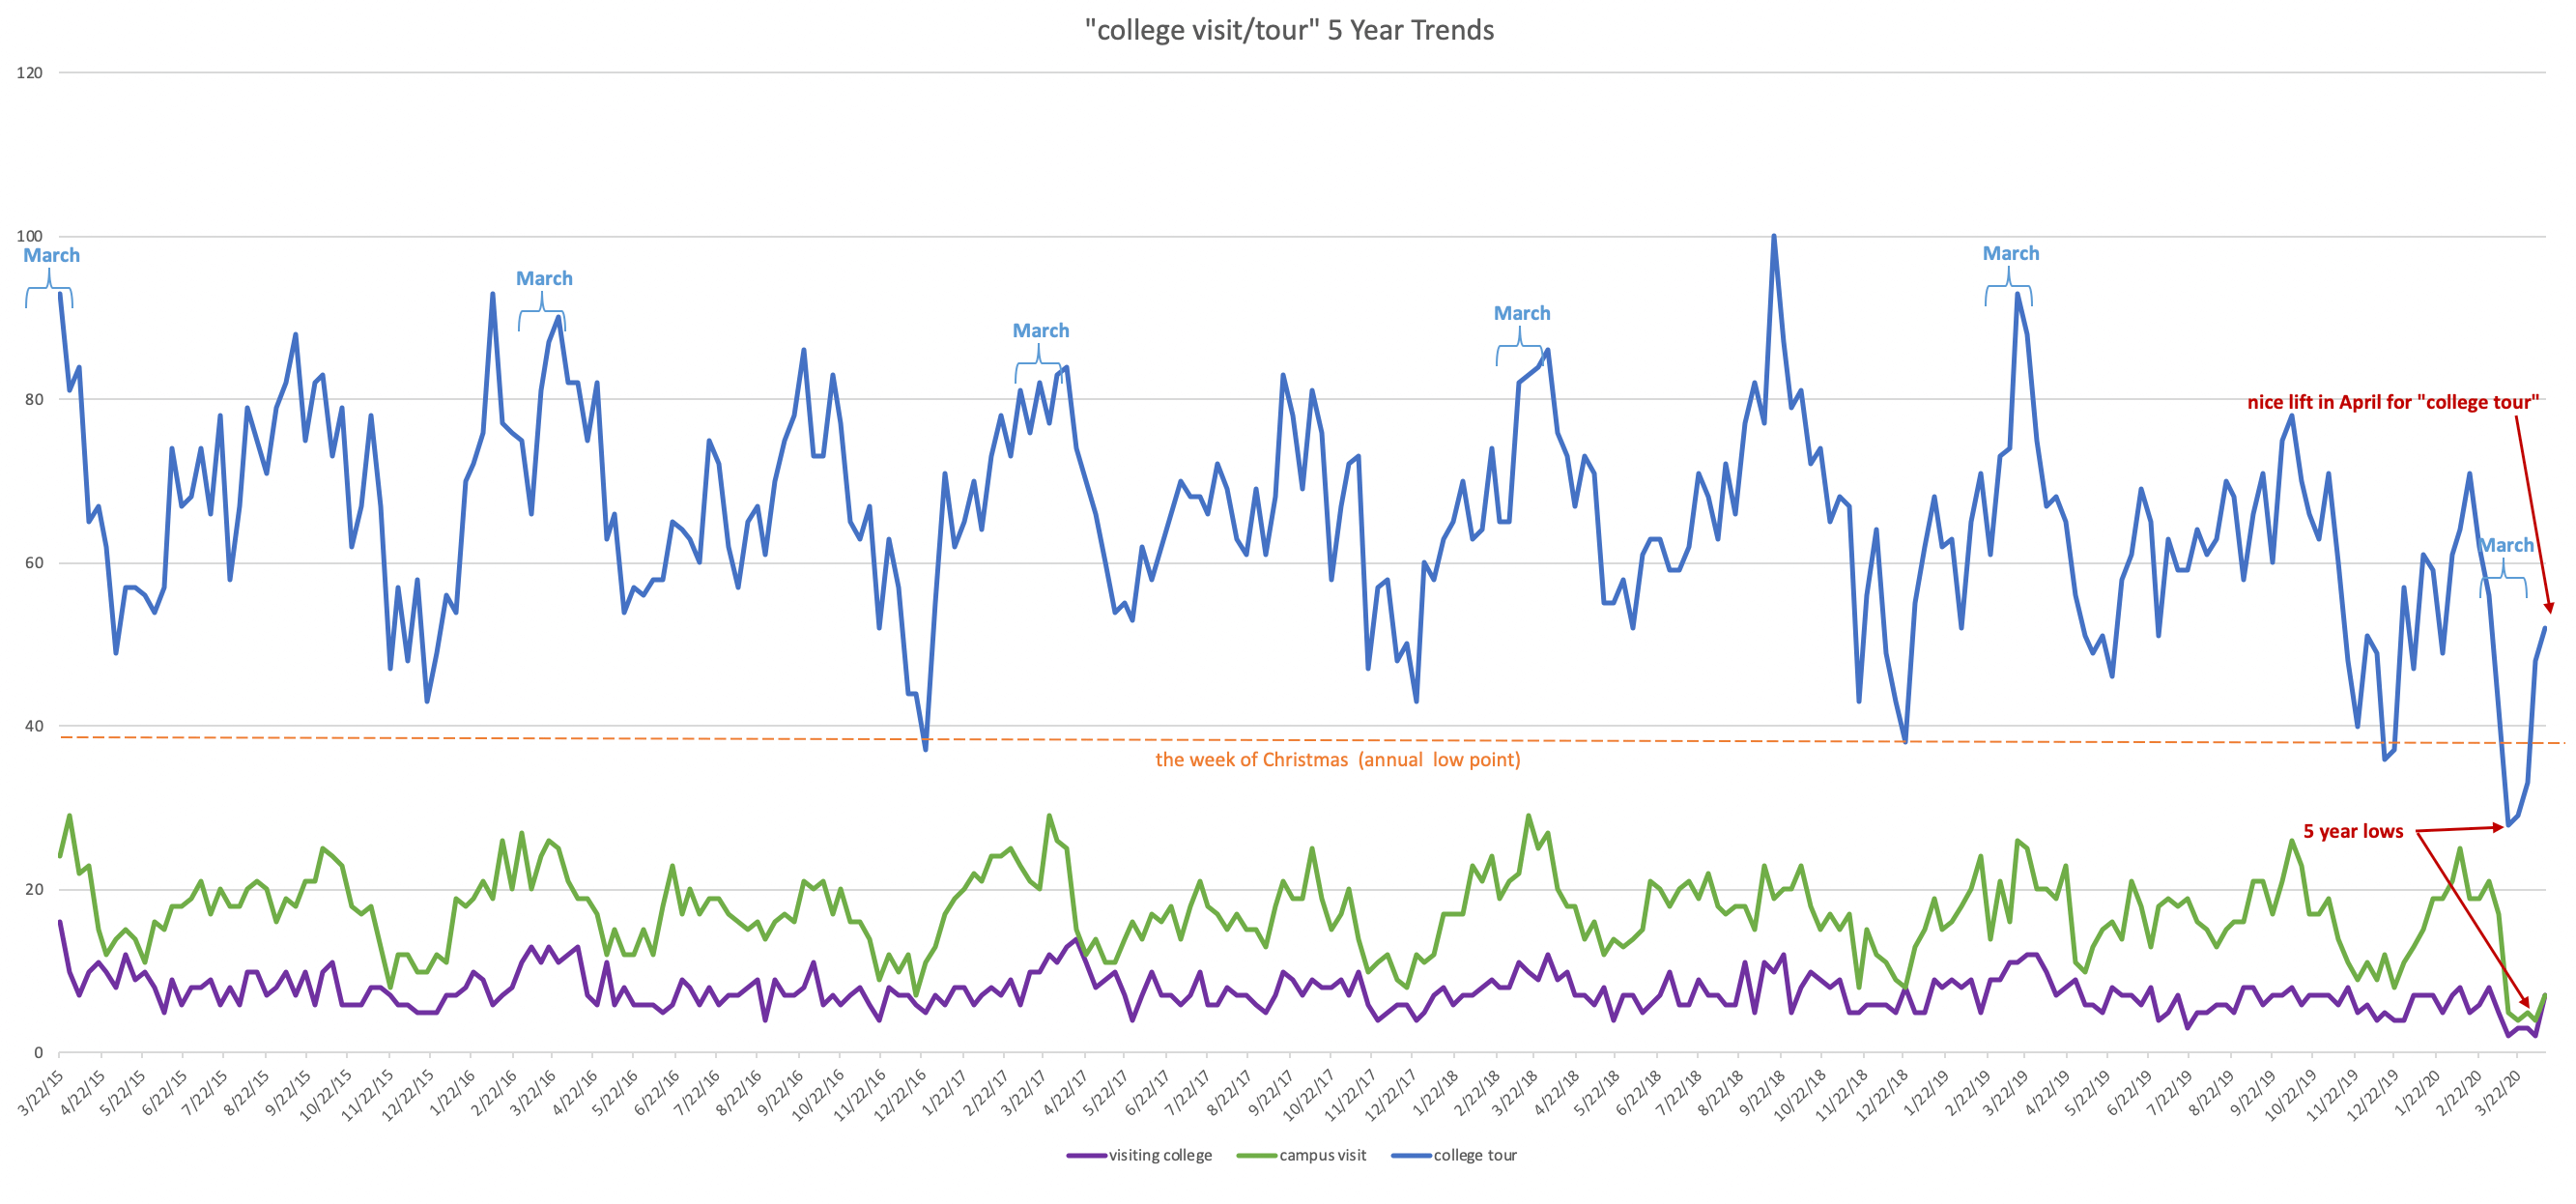 college visit/tour 5-year trend